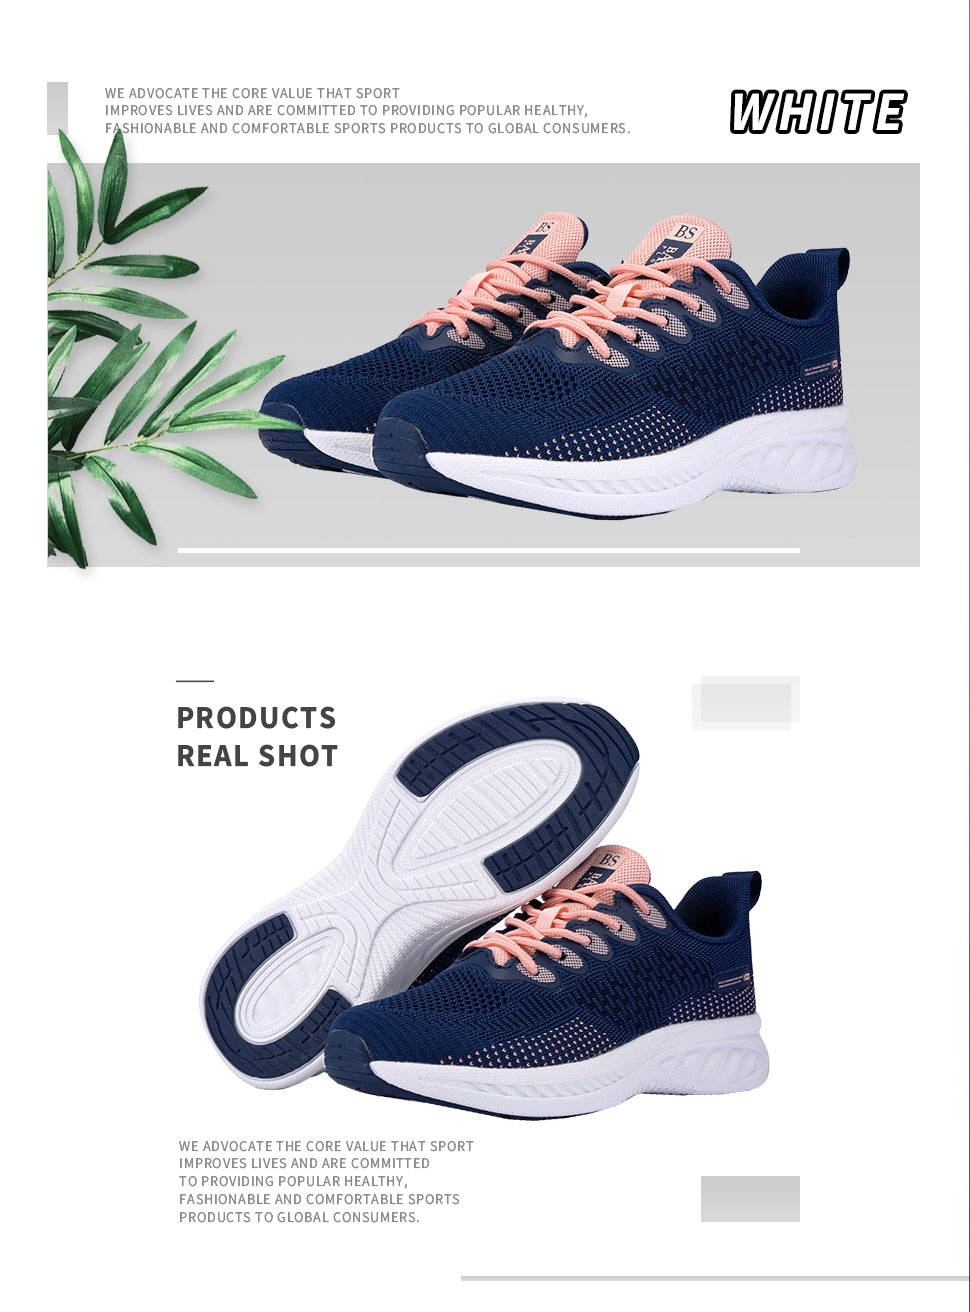 Women's Fashion Sneaker Light Knit Running Shoes Yoga Gym Tennis Sneaker Comfortable Walking Shoes The Clothing Company Sydney